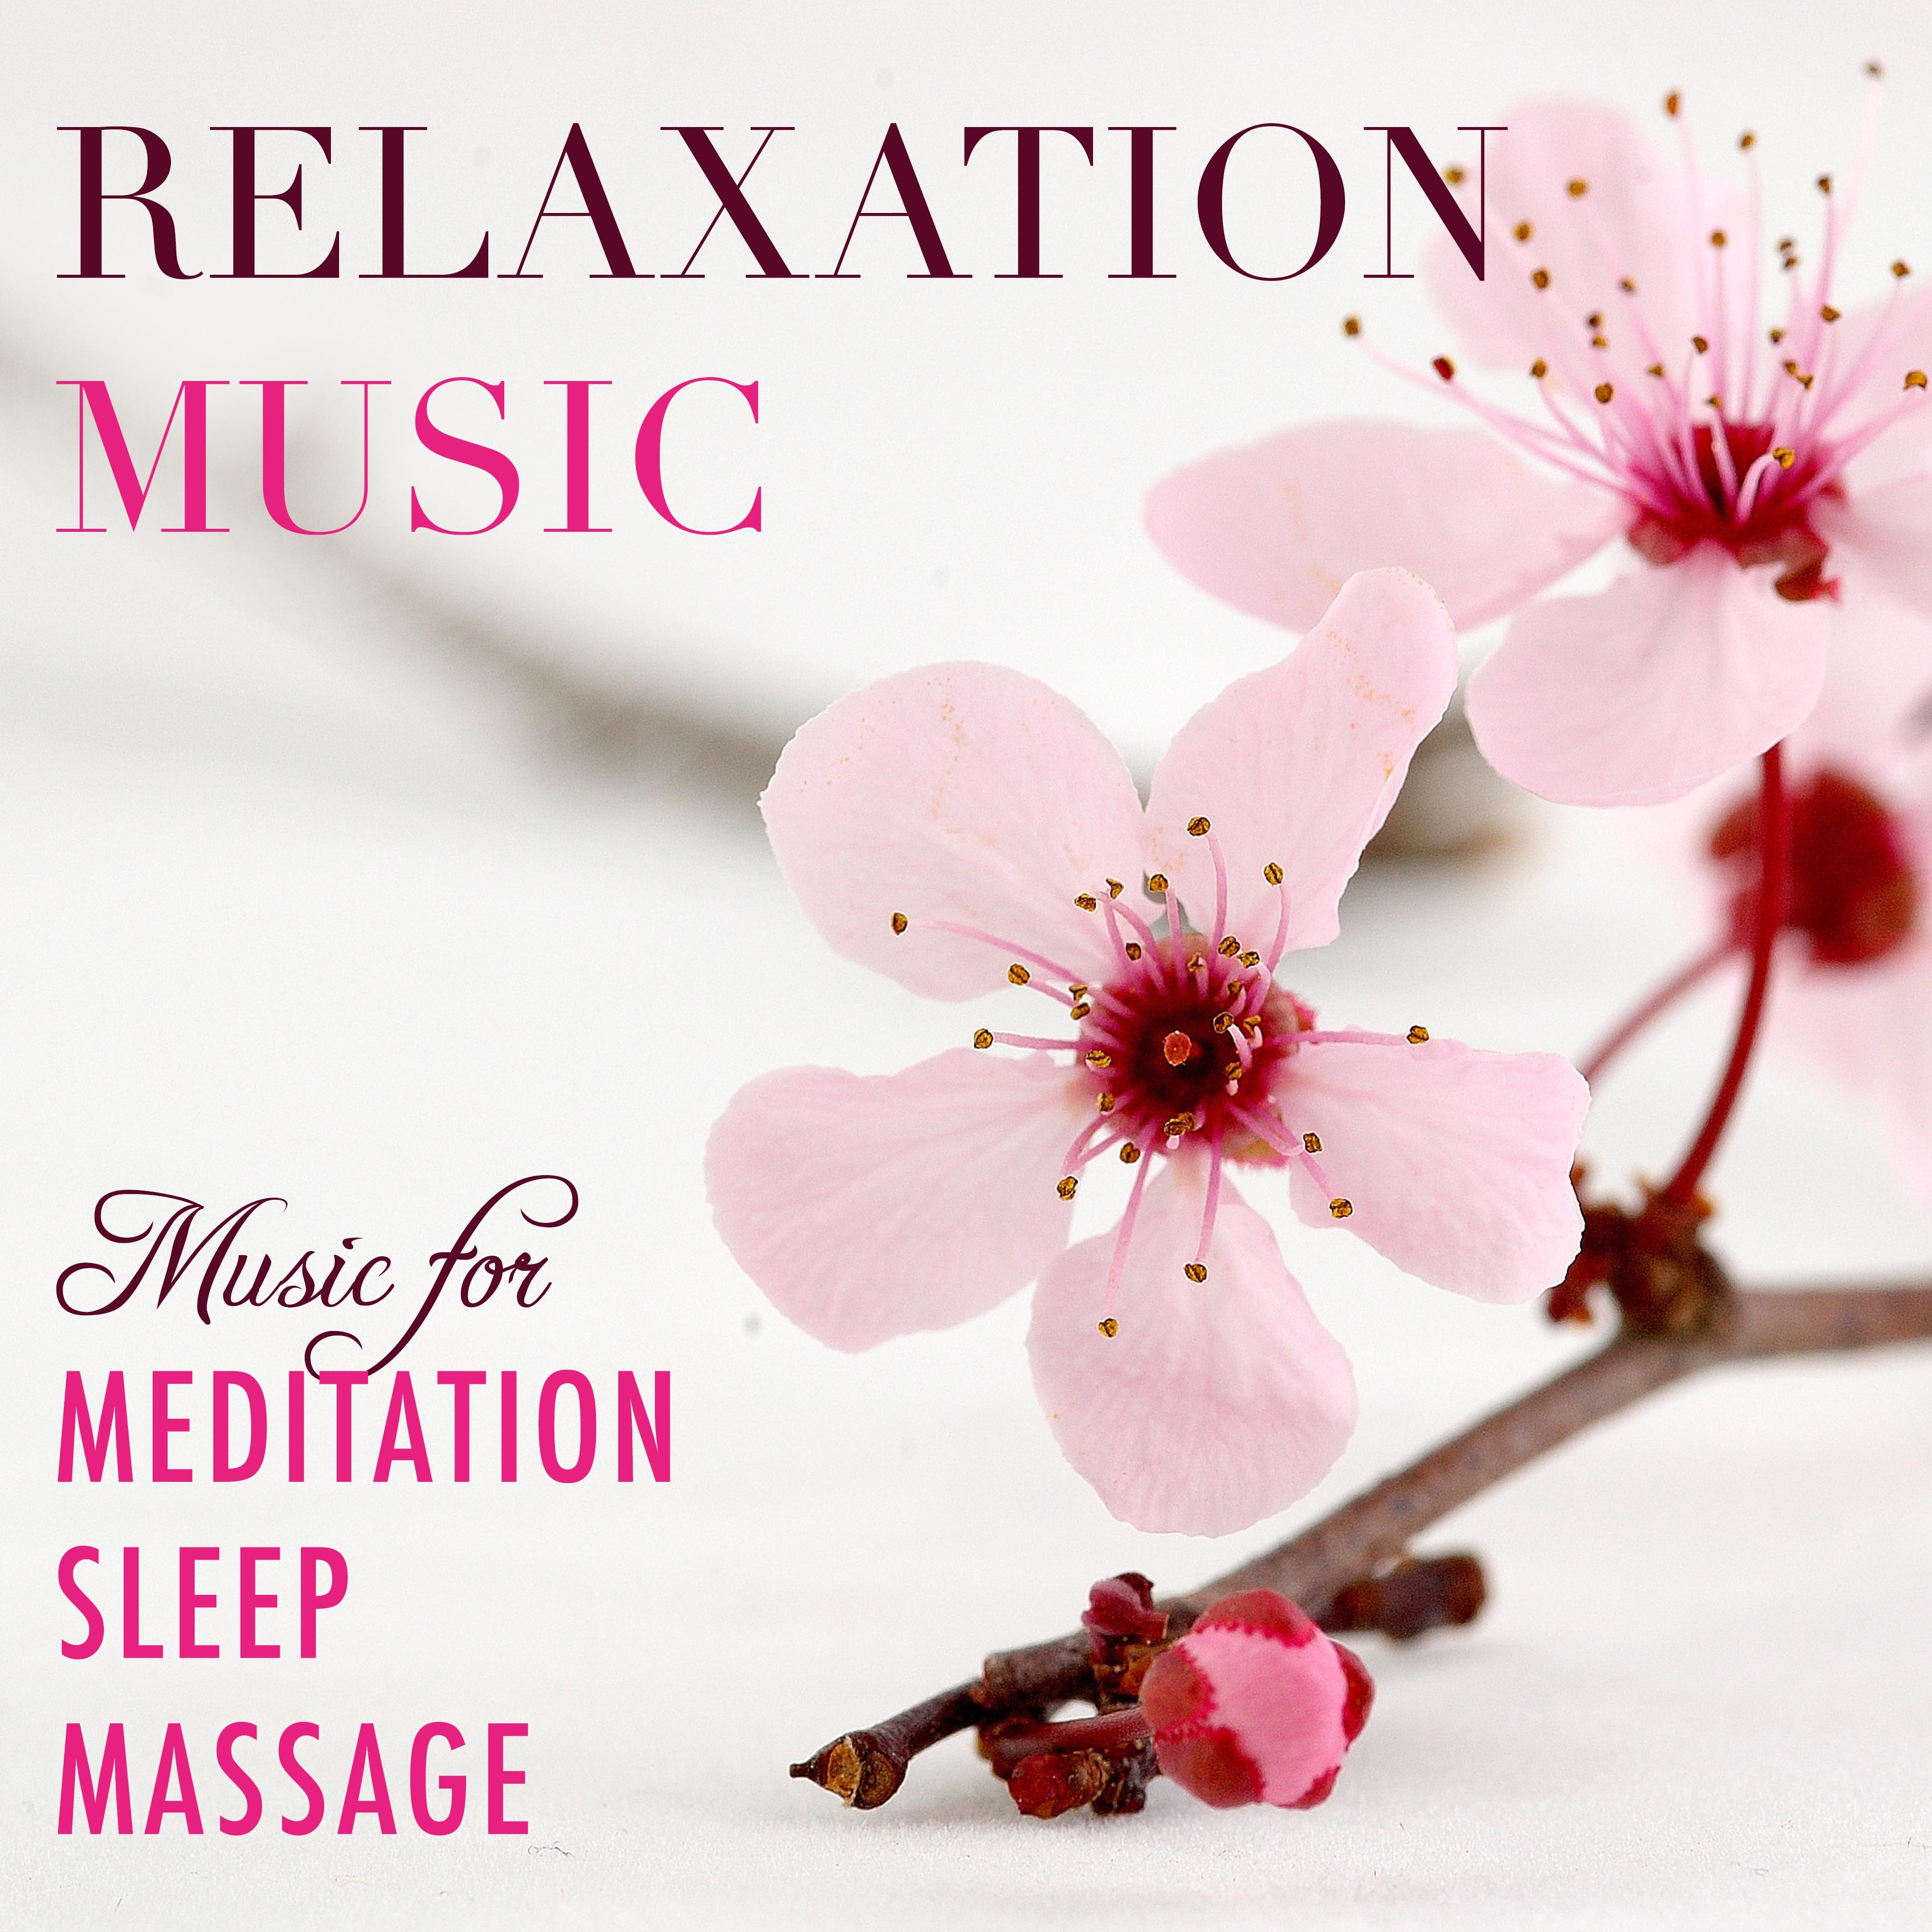 Relaxation Music: Music for Meditation, Sleep and Massage with Nature Sounds and White Noise